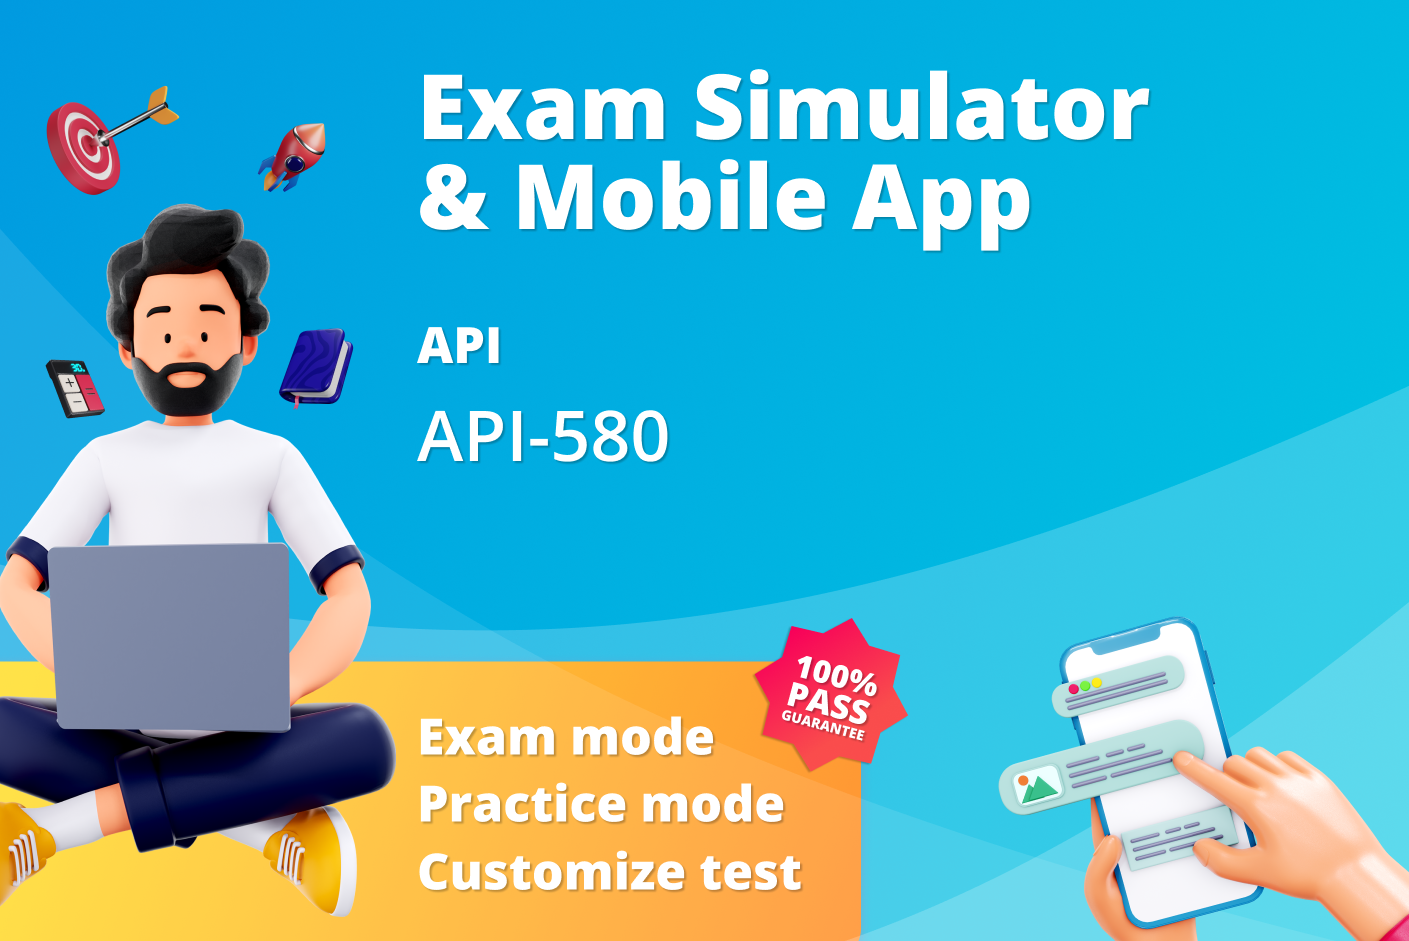 Prepare for the API-580 mock exam and ace it with confidence. Get ready to succeed with our comprehensive study materials